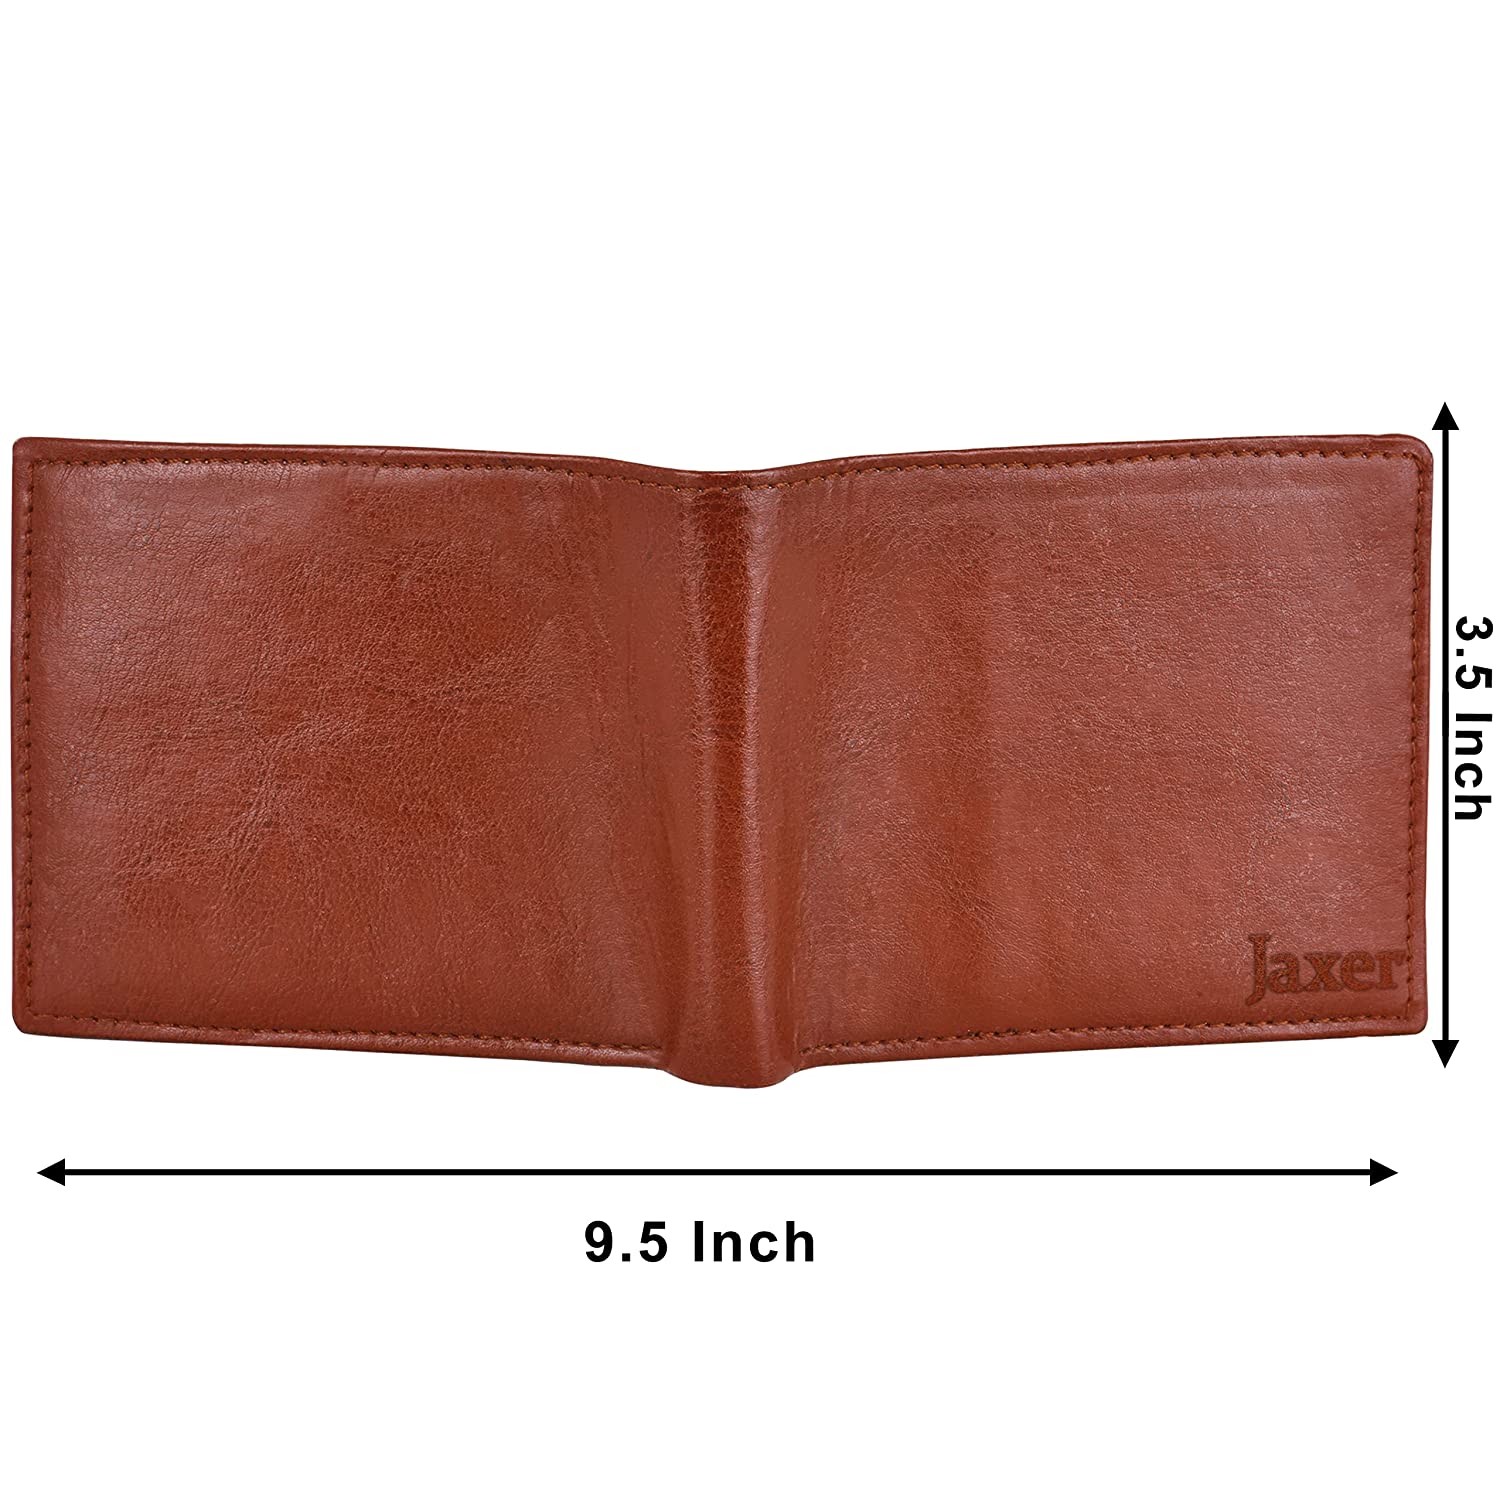 Men Casual, Formal, Evening/Party Brown Artificial Leather Wallet (3 Card Slots) - Jainx Store